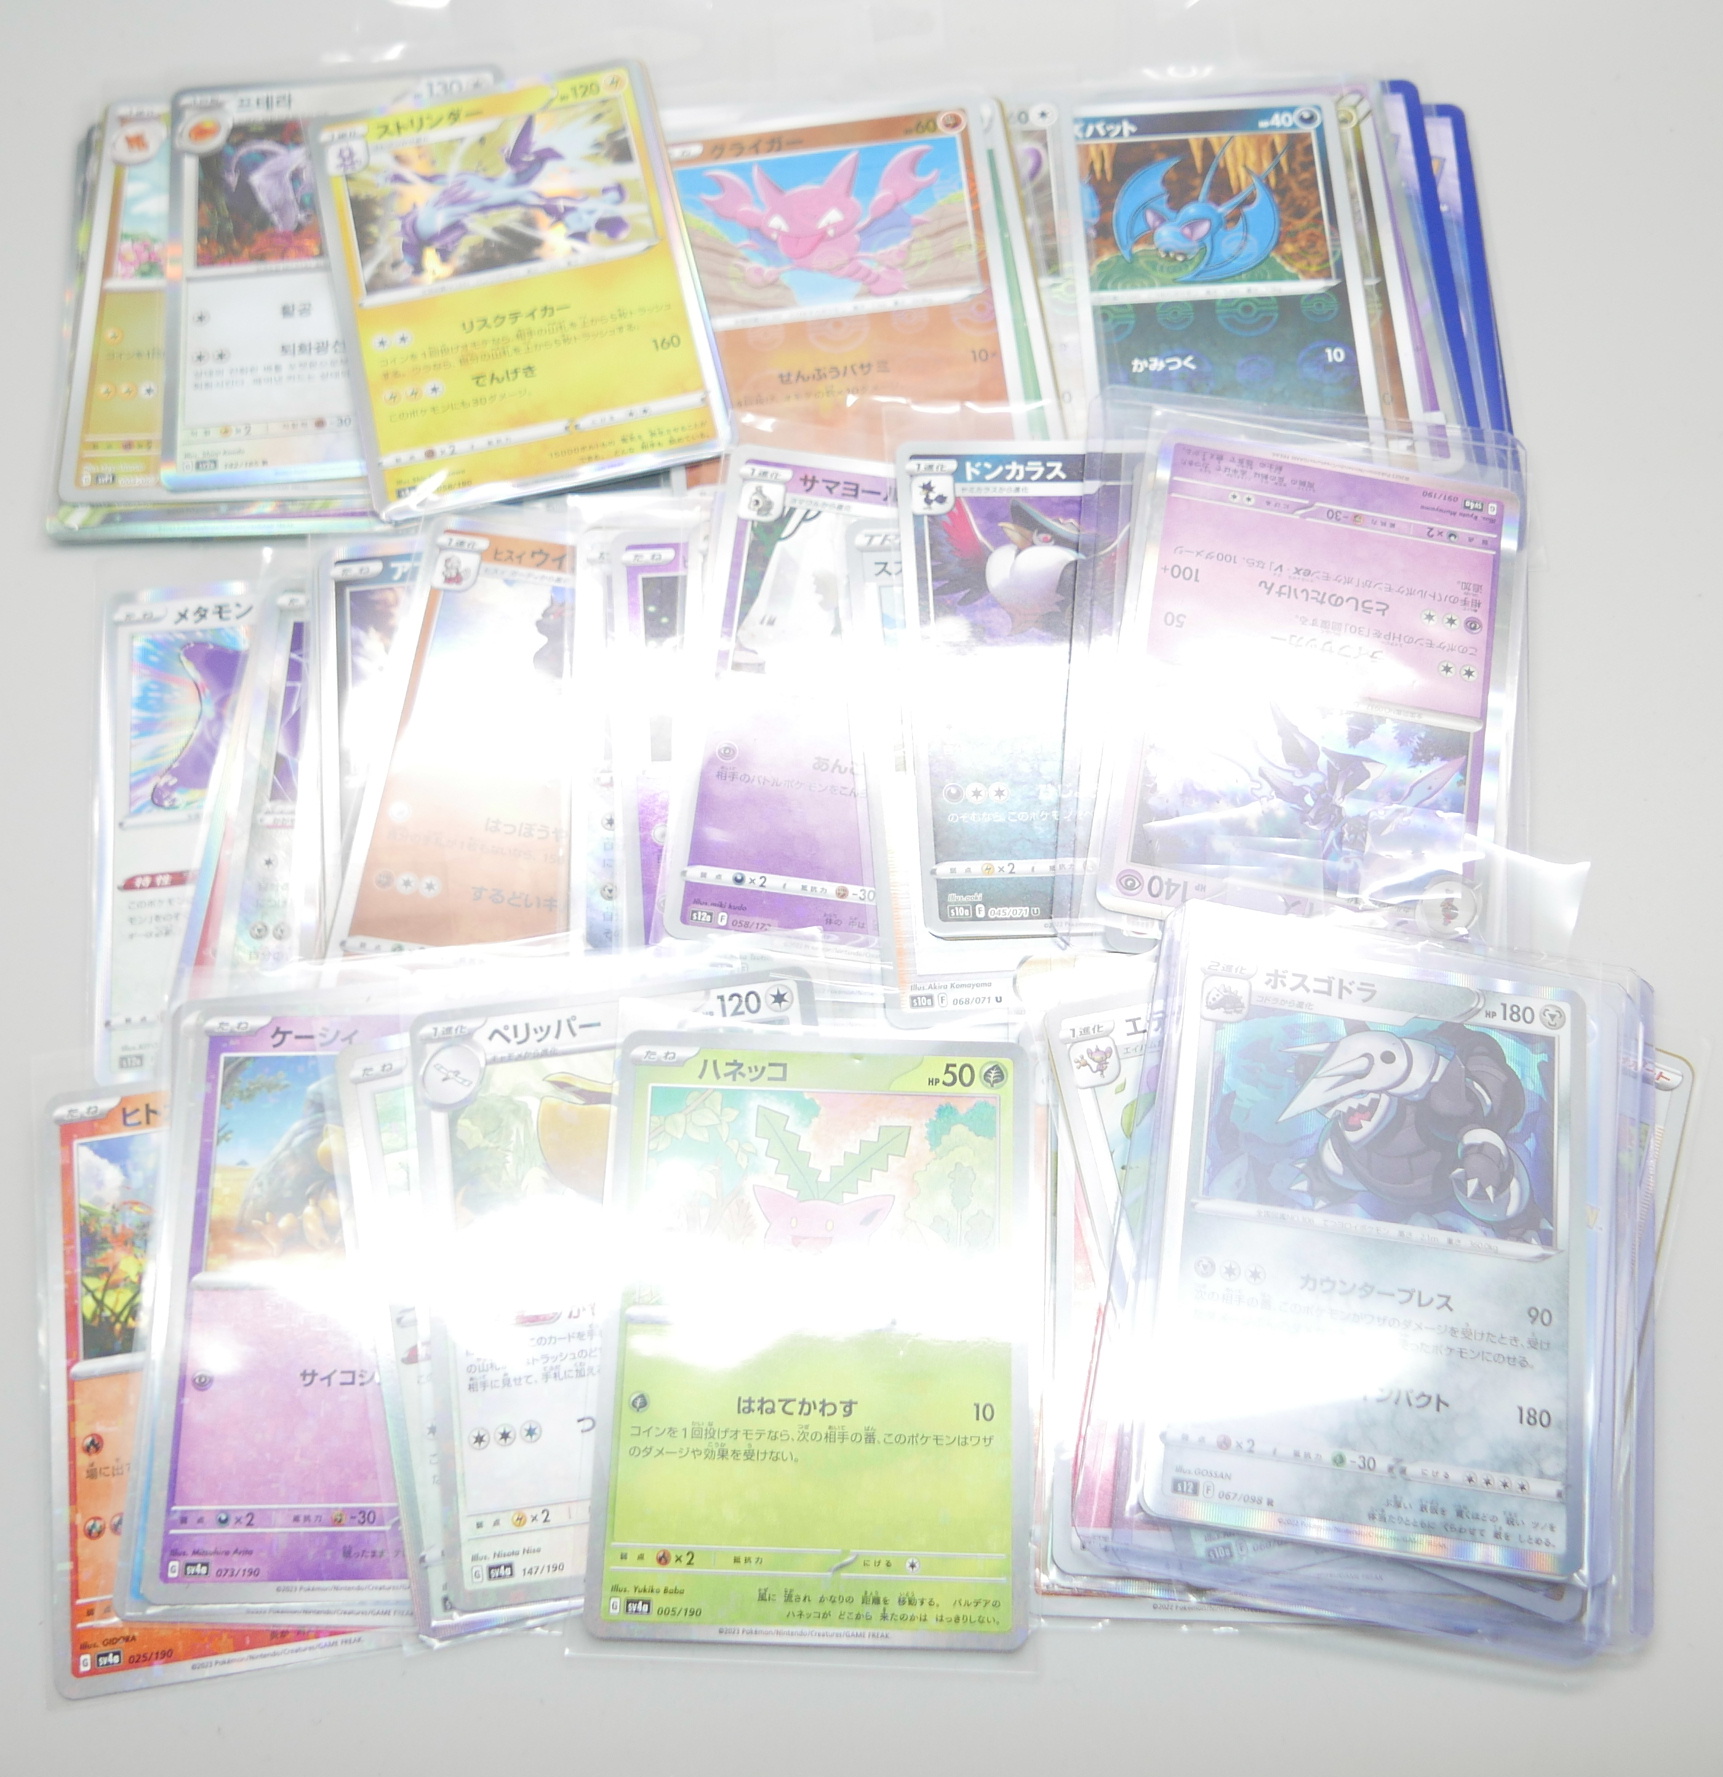 A collection of Japanese Pokemon cards in protective sleeves